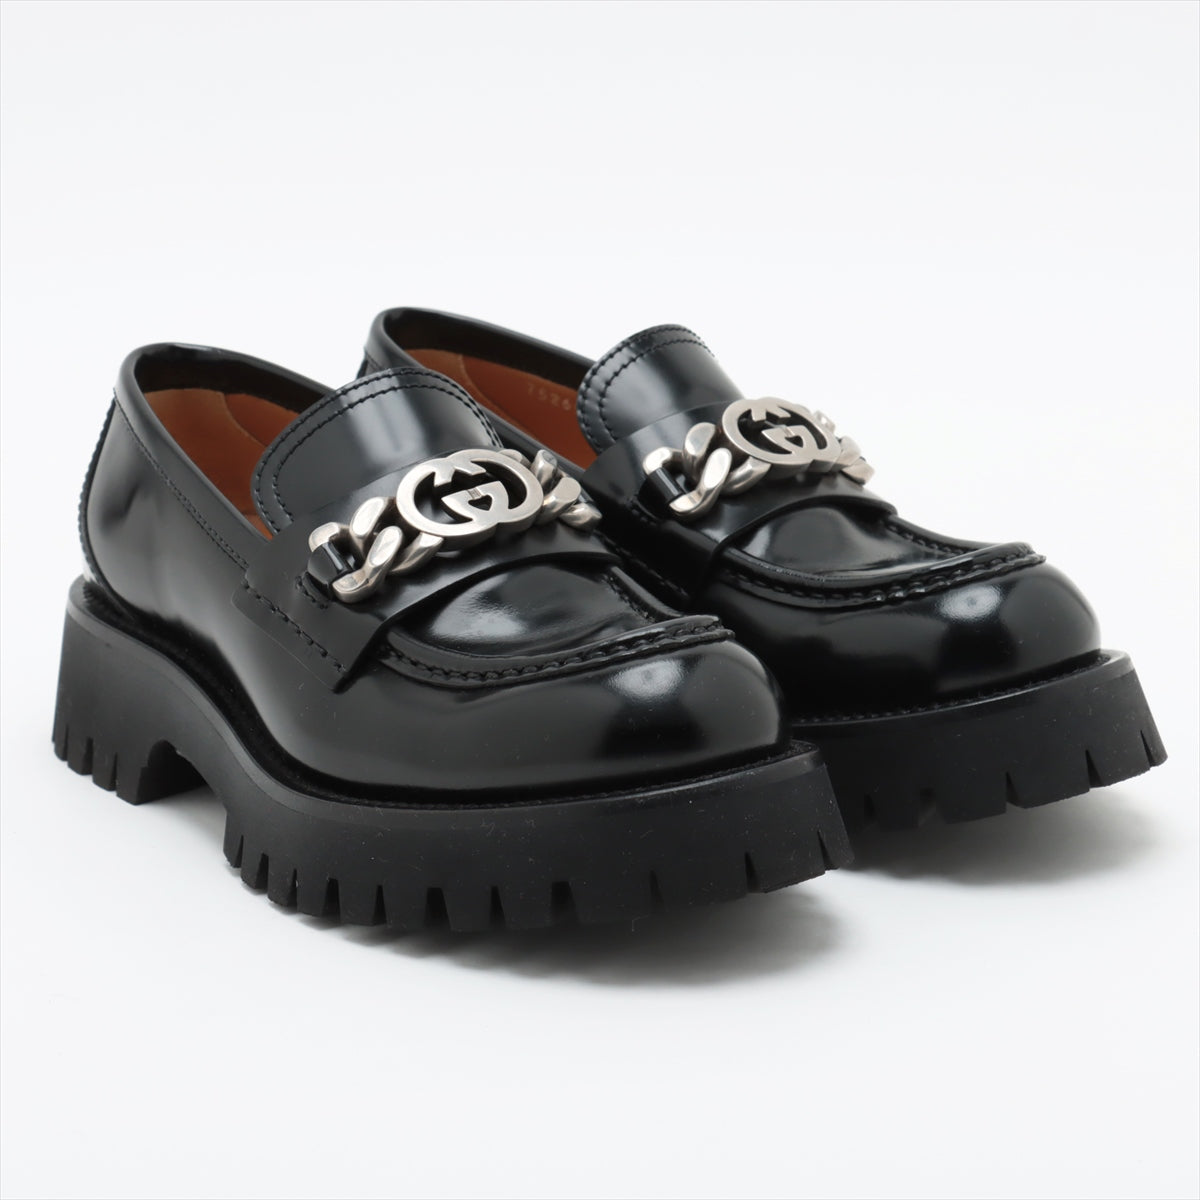 Gucci Patent leather Loafer 37.5 Ladies' Black 752650 Lug sole GG Chain